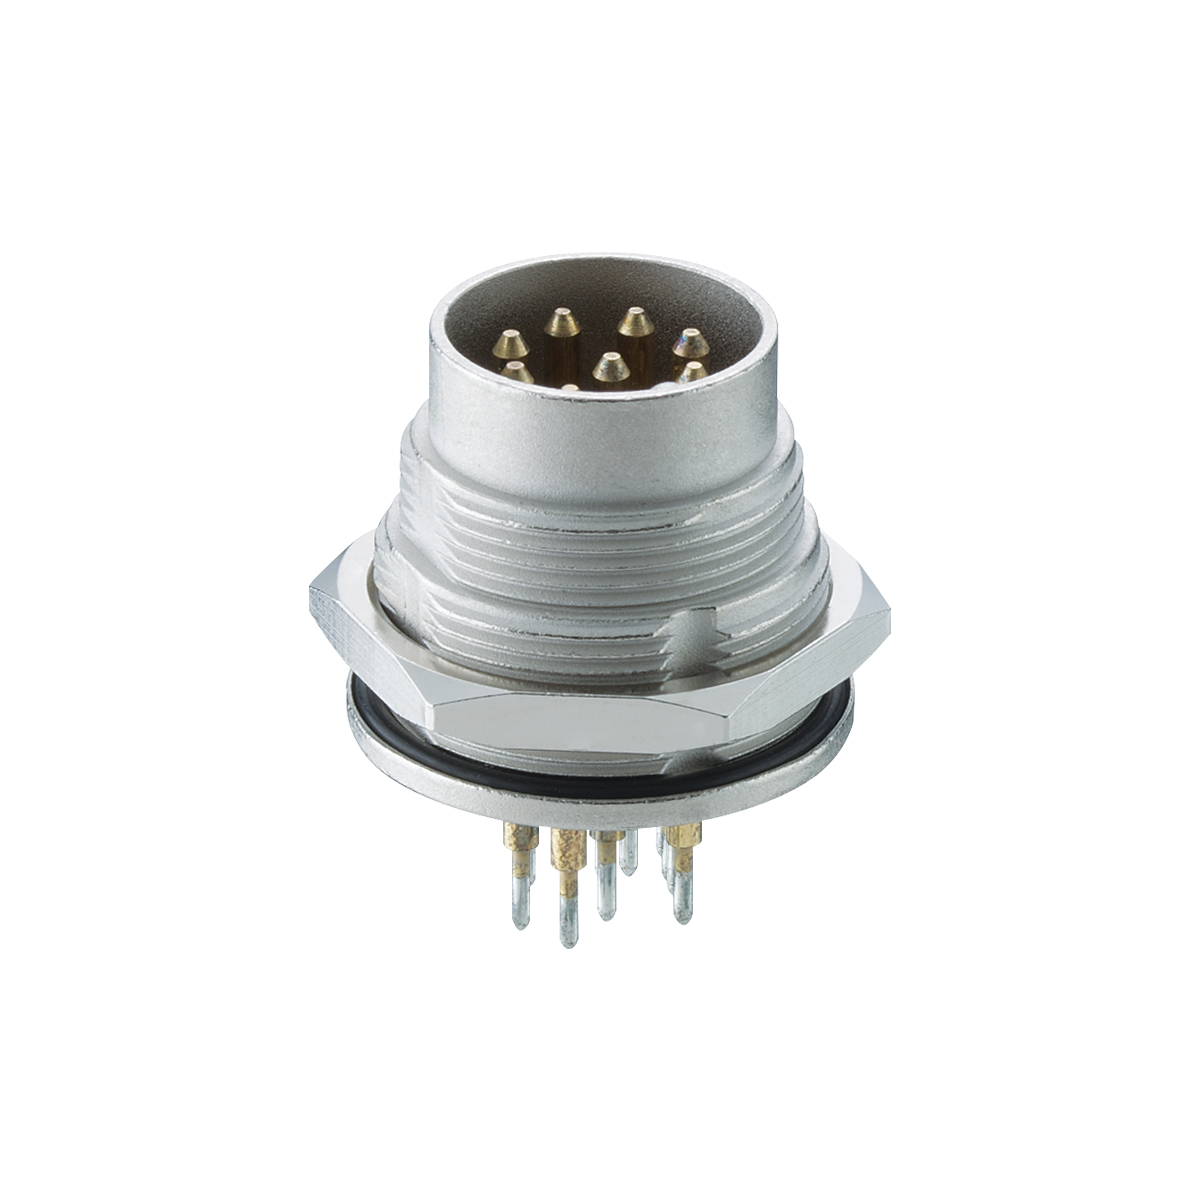 Lumberg: 031799-2 (Series 03 | Circular connectors with threaded joint M16 acc. to IEC 61076-2-106, IP40/IP68)